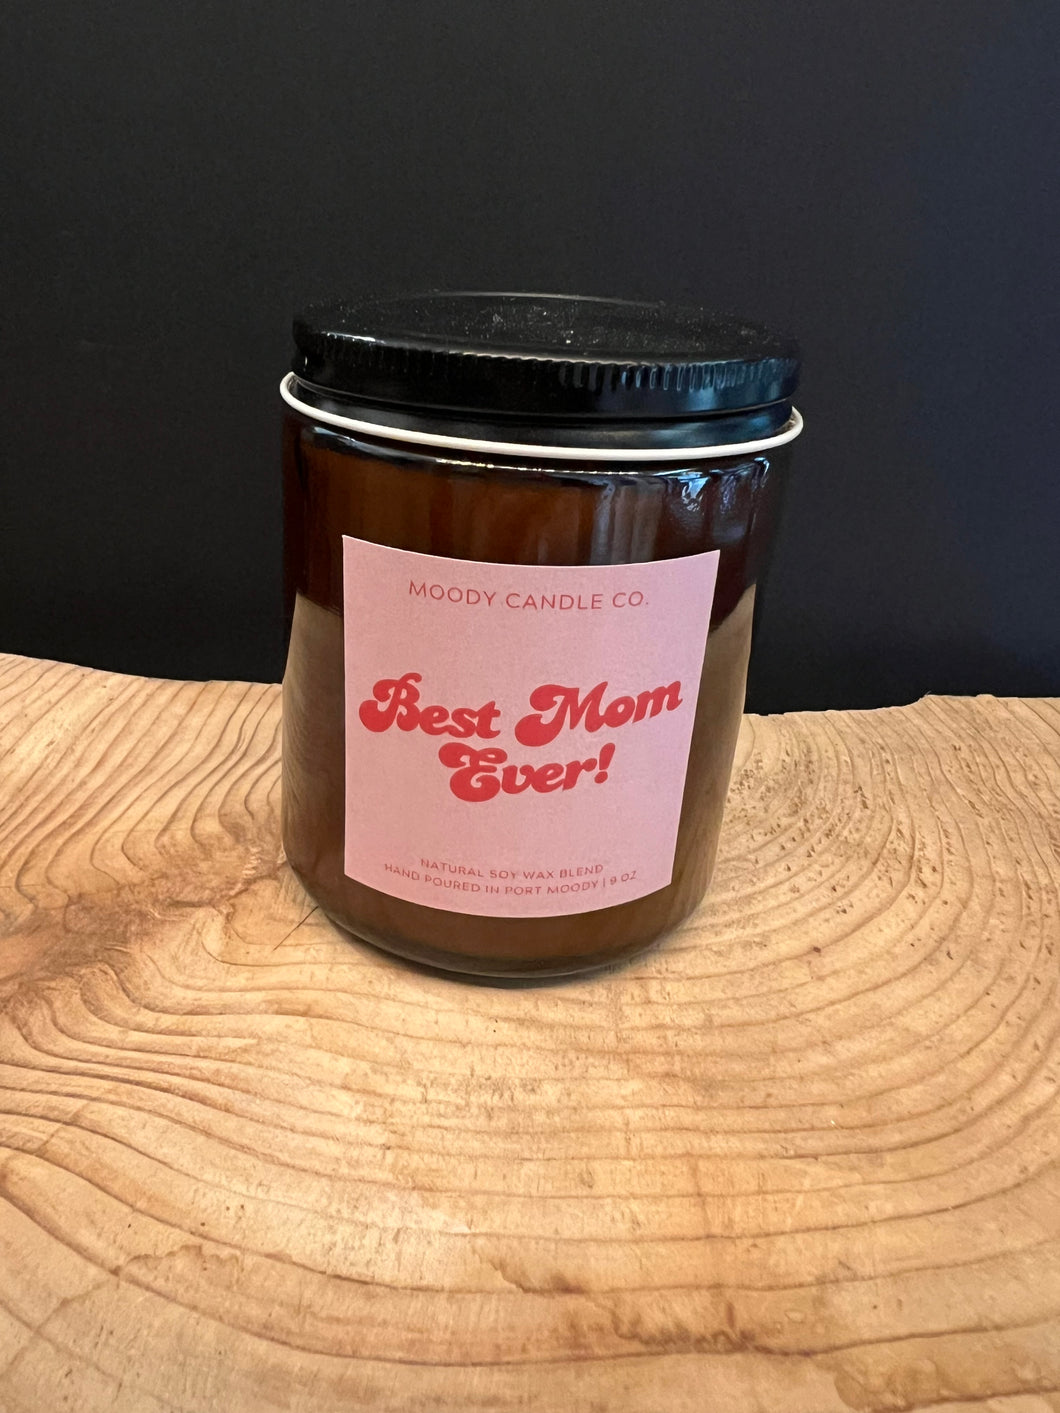 Moody Candle Co. - Best Mom Ever!